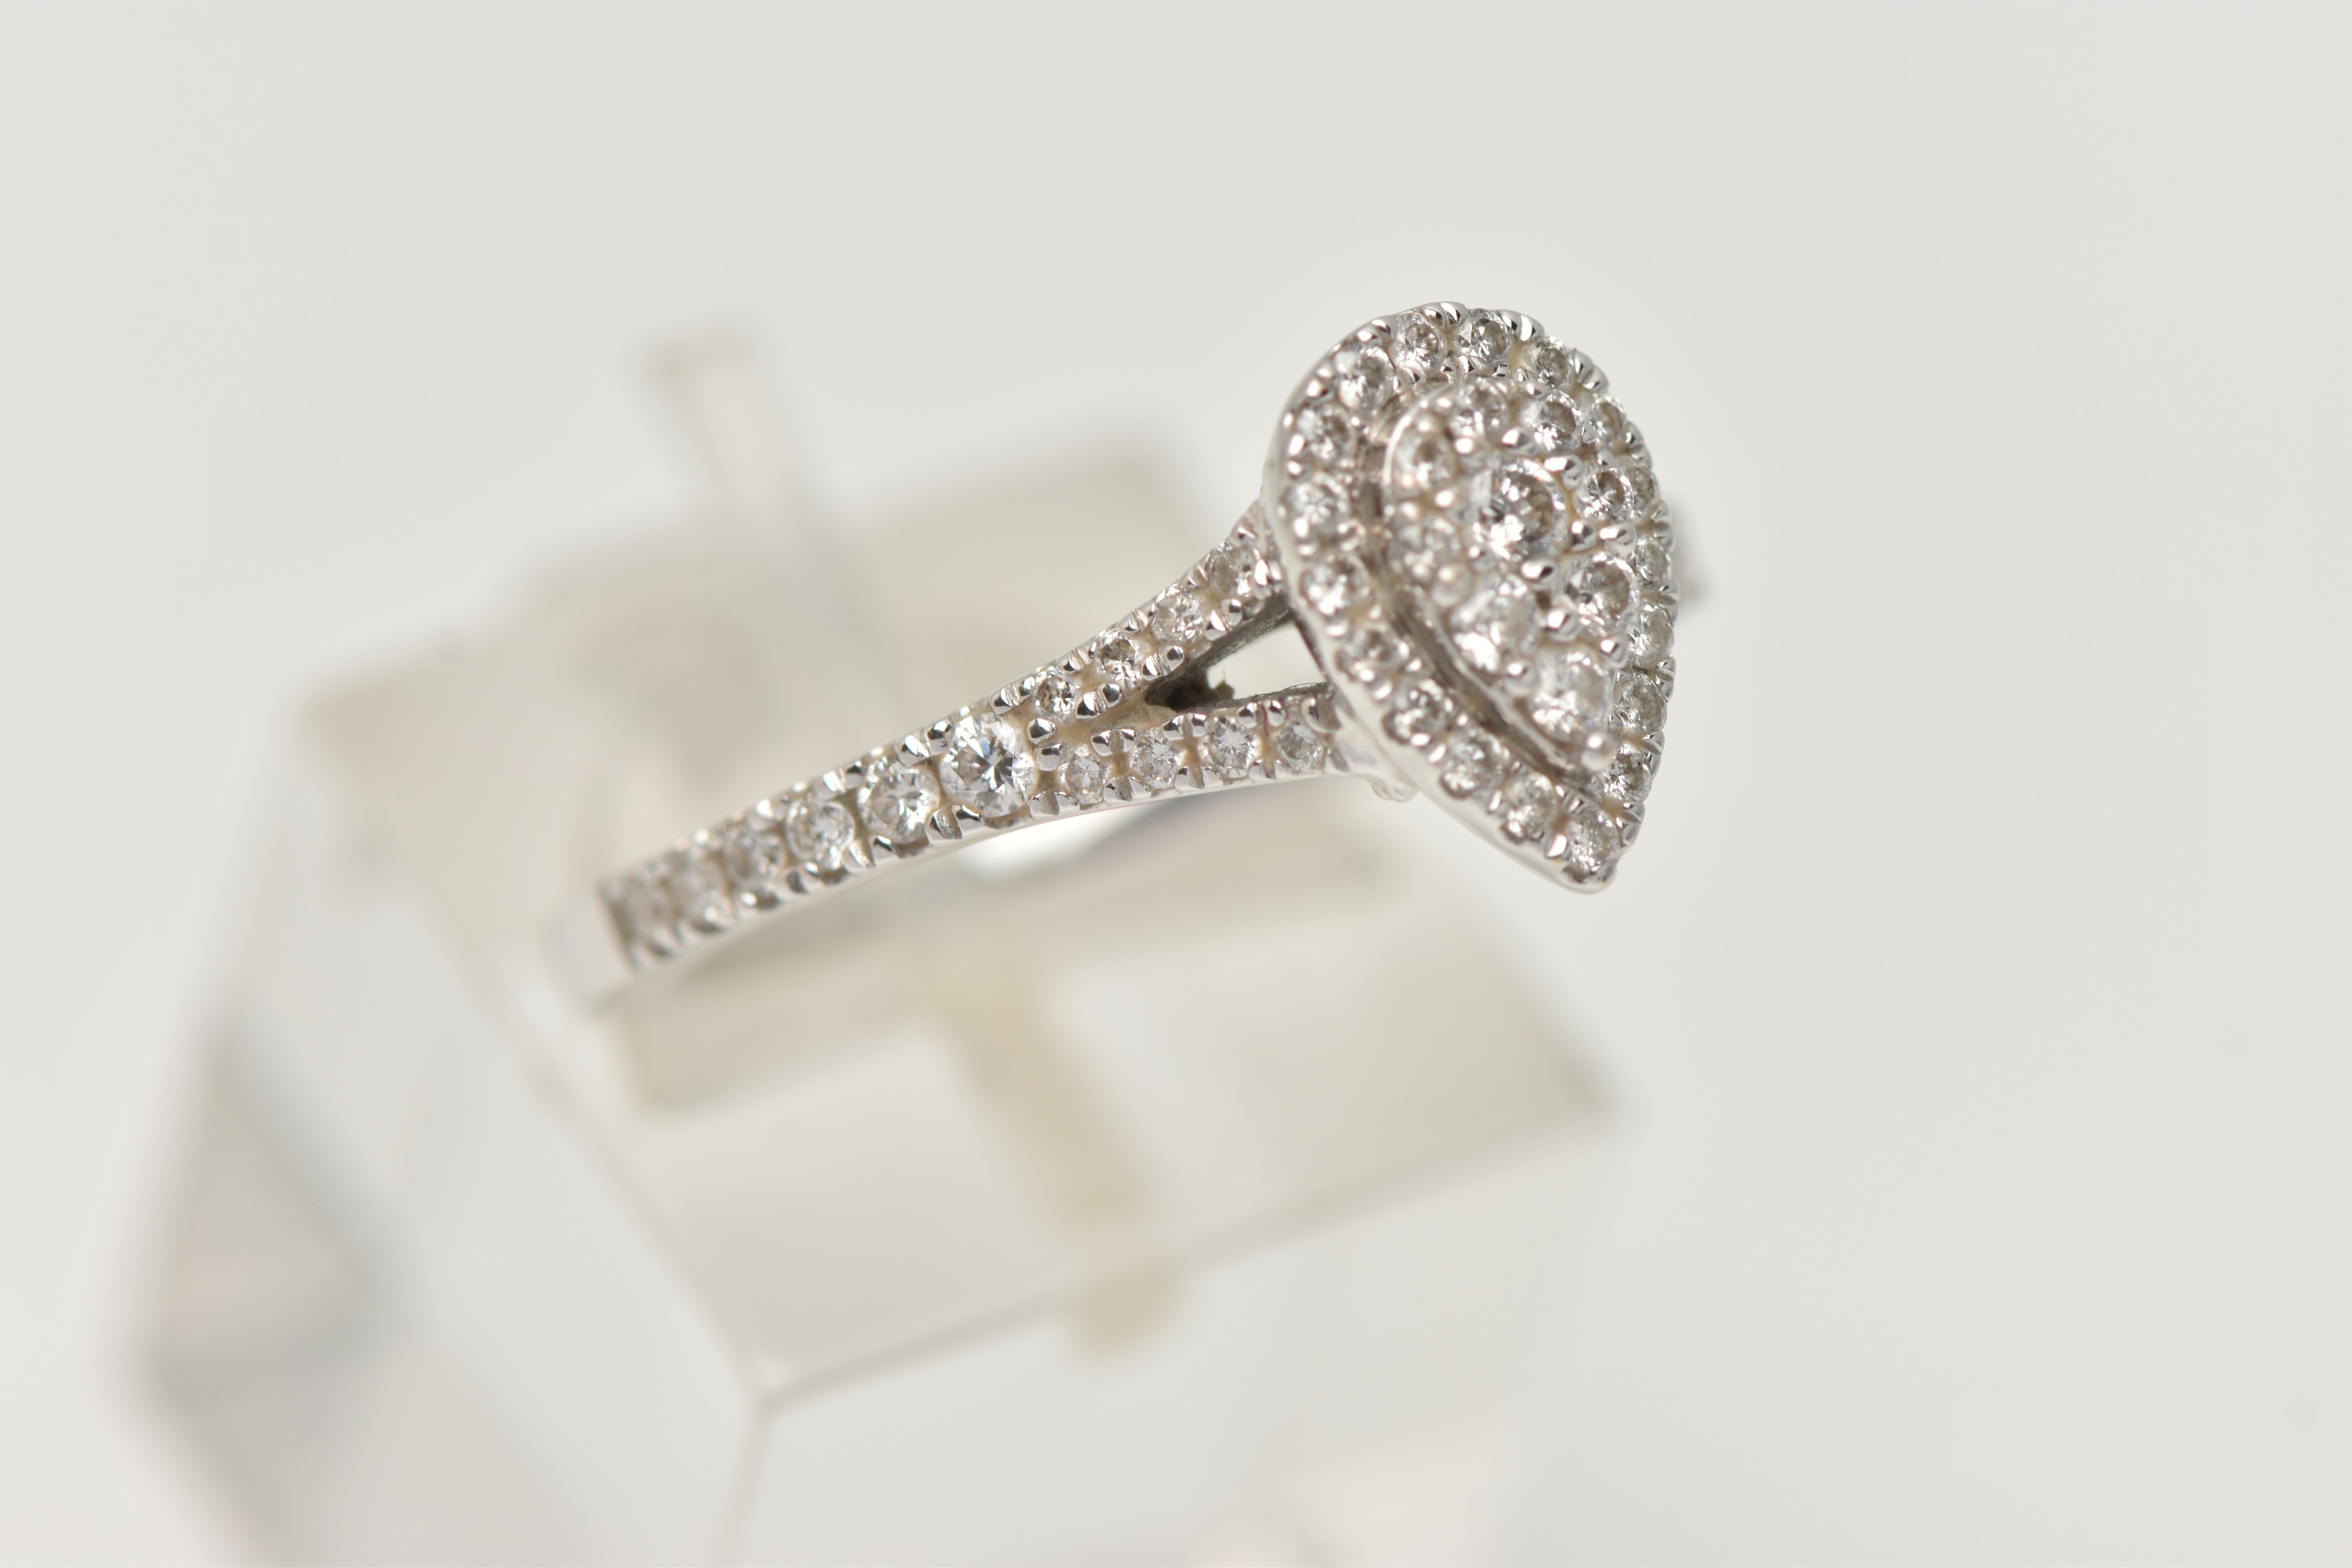 A 'VERA WANG', 18CT WHITE GOLD, DIAMOND SET RING, of a pear cut design, set with a cluster of - Image 6 of 7